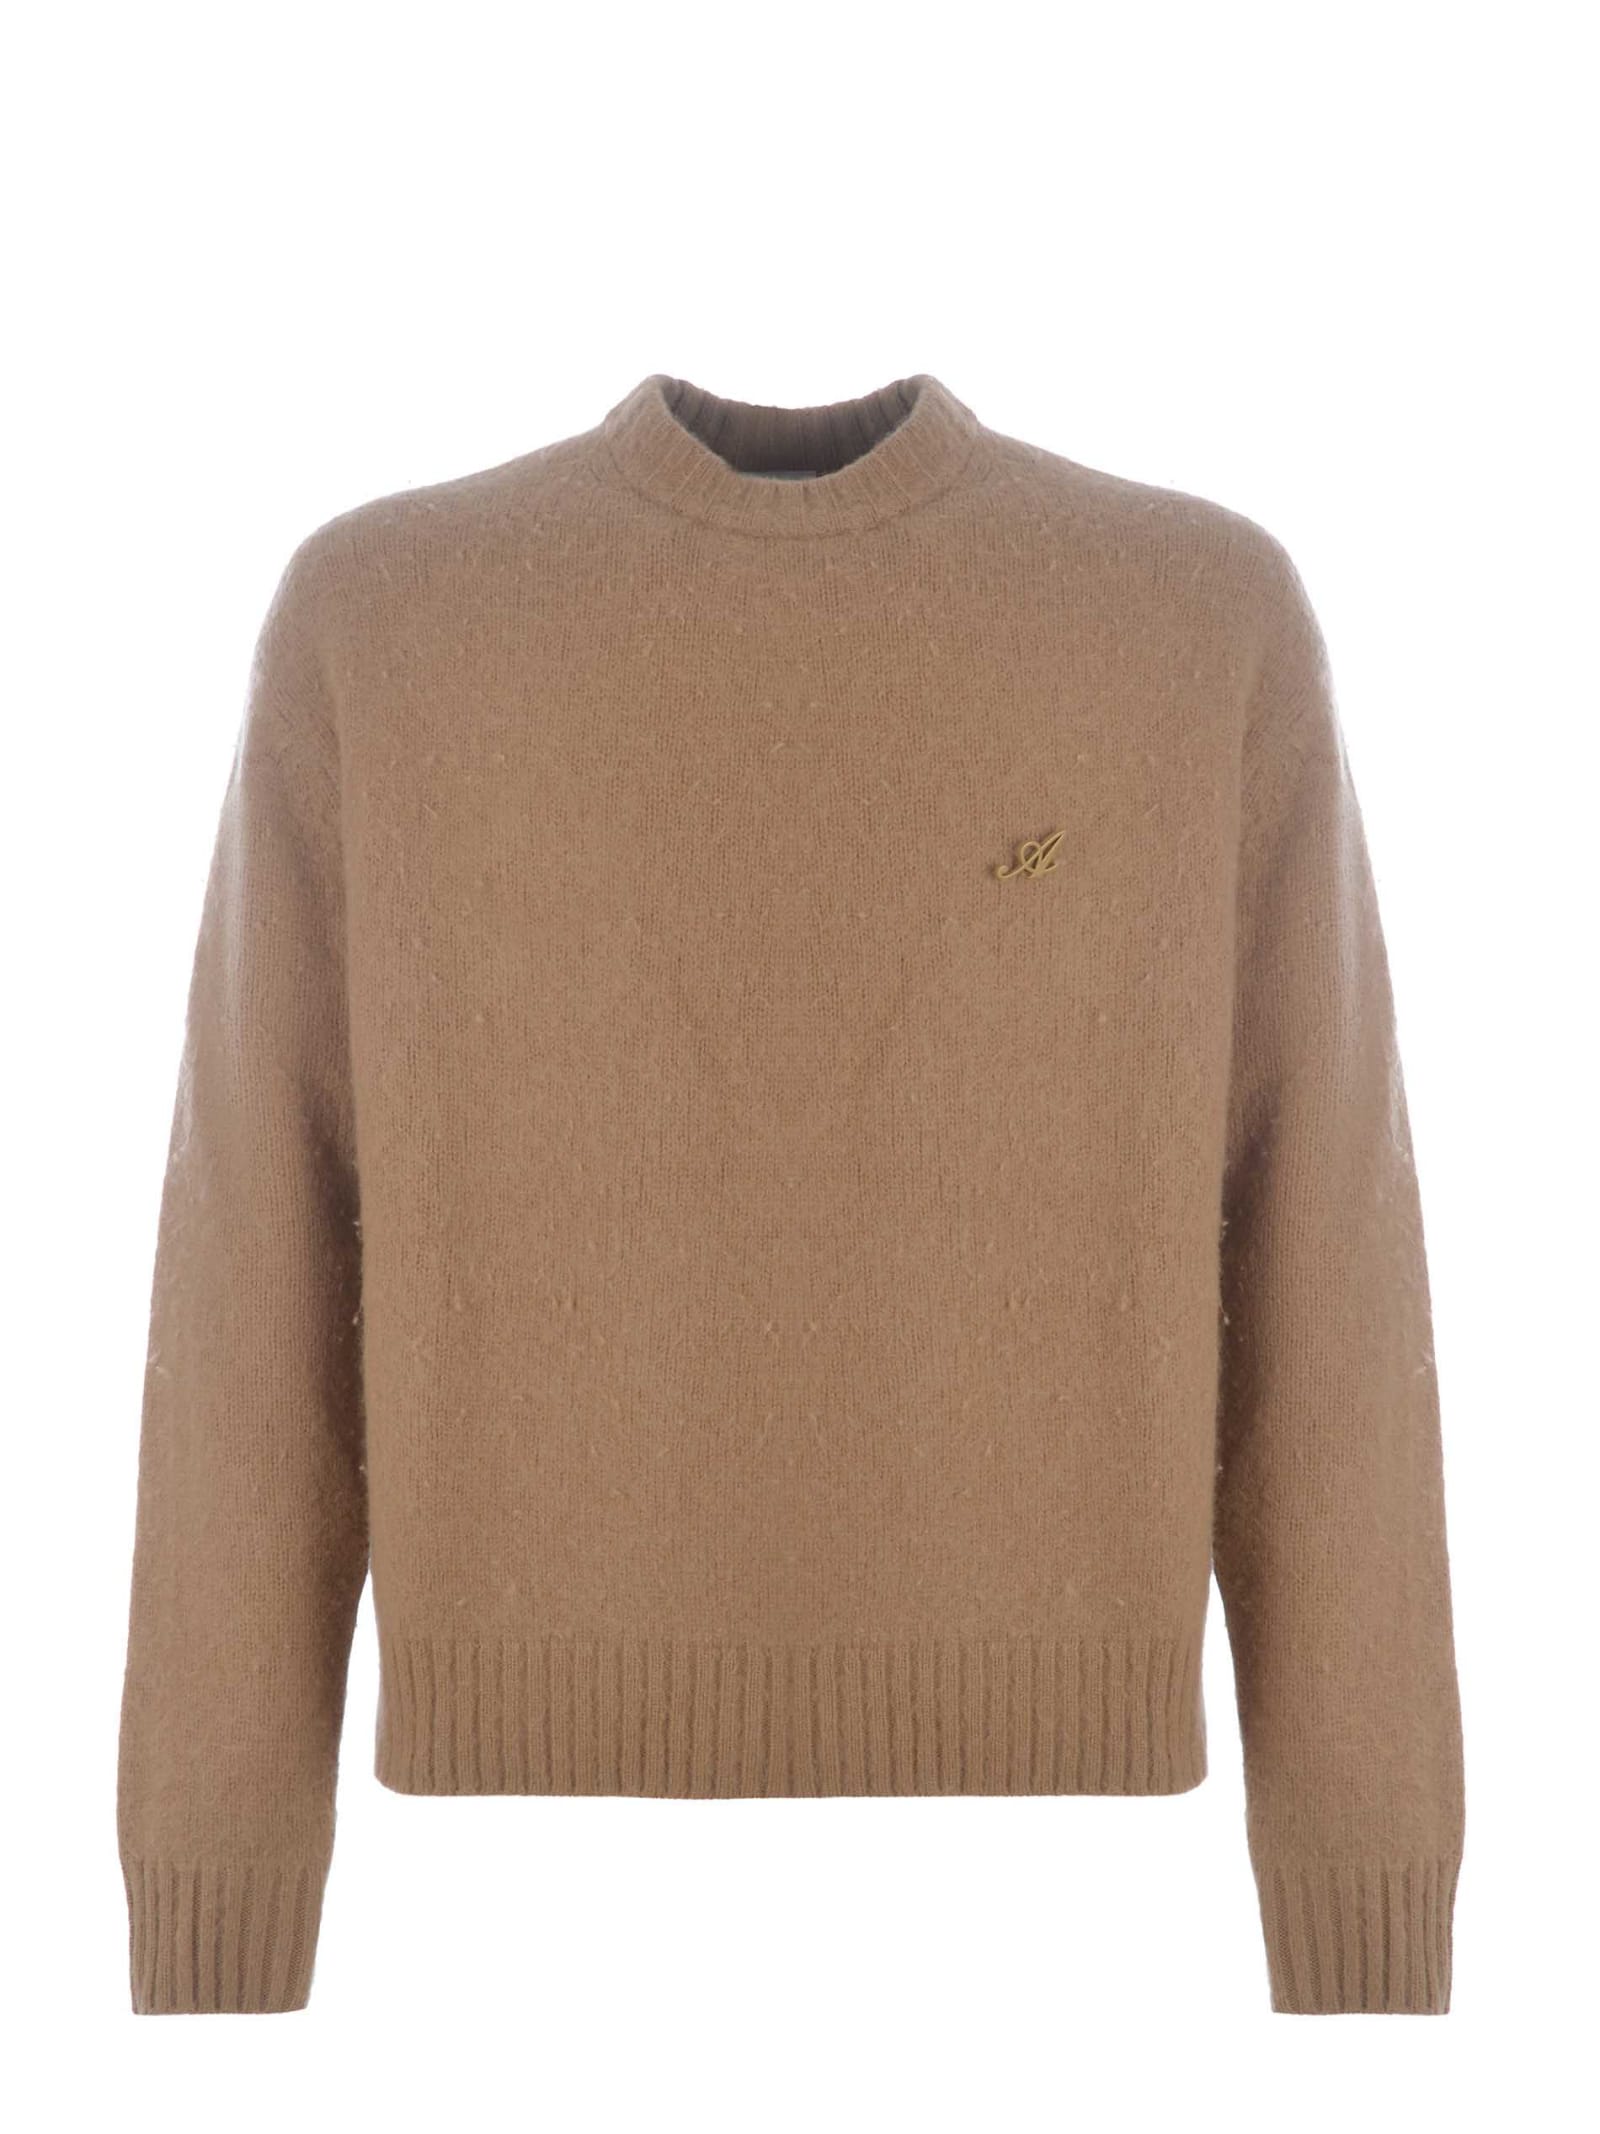 AXEL ARIGATO SWEATER AXEL ARIGATO PIN IN WOOL AND CASHMERE